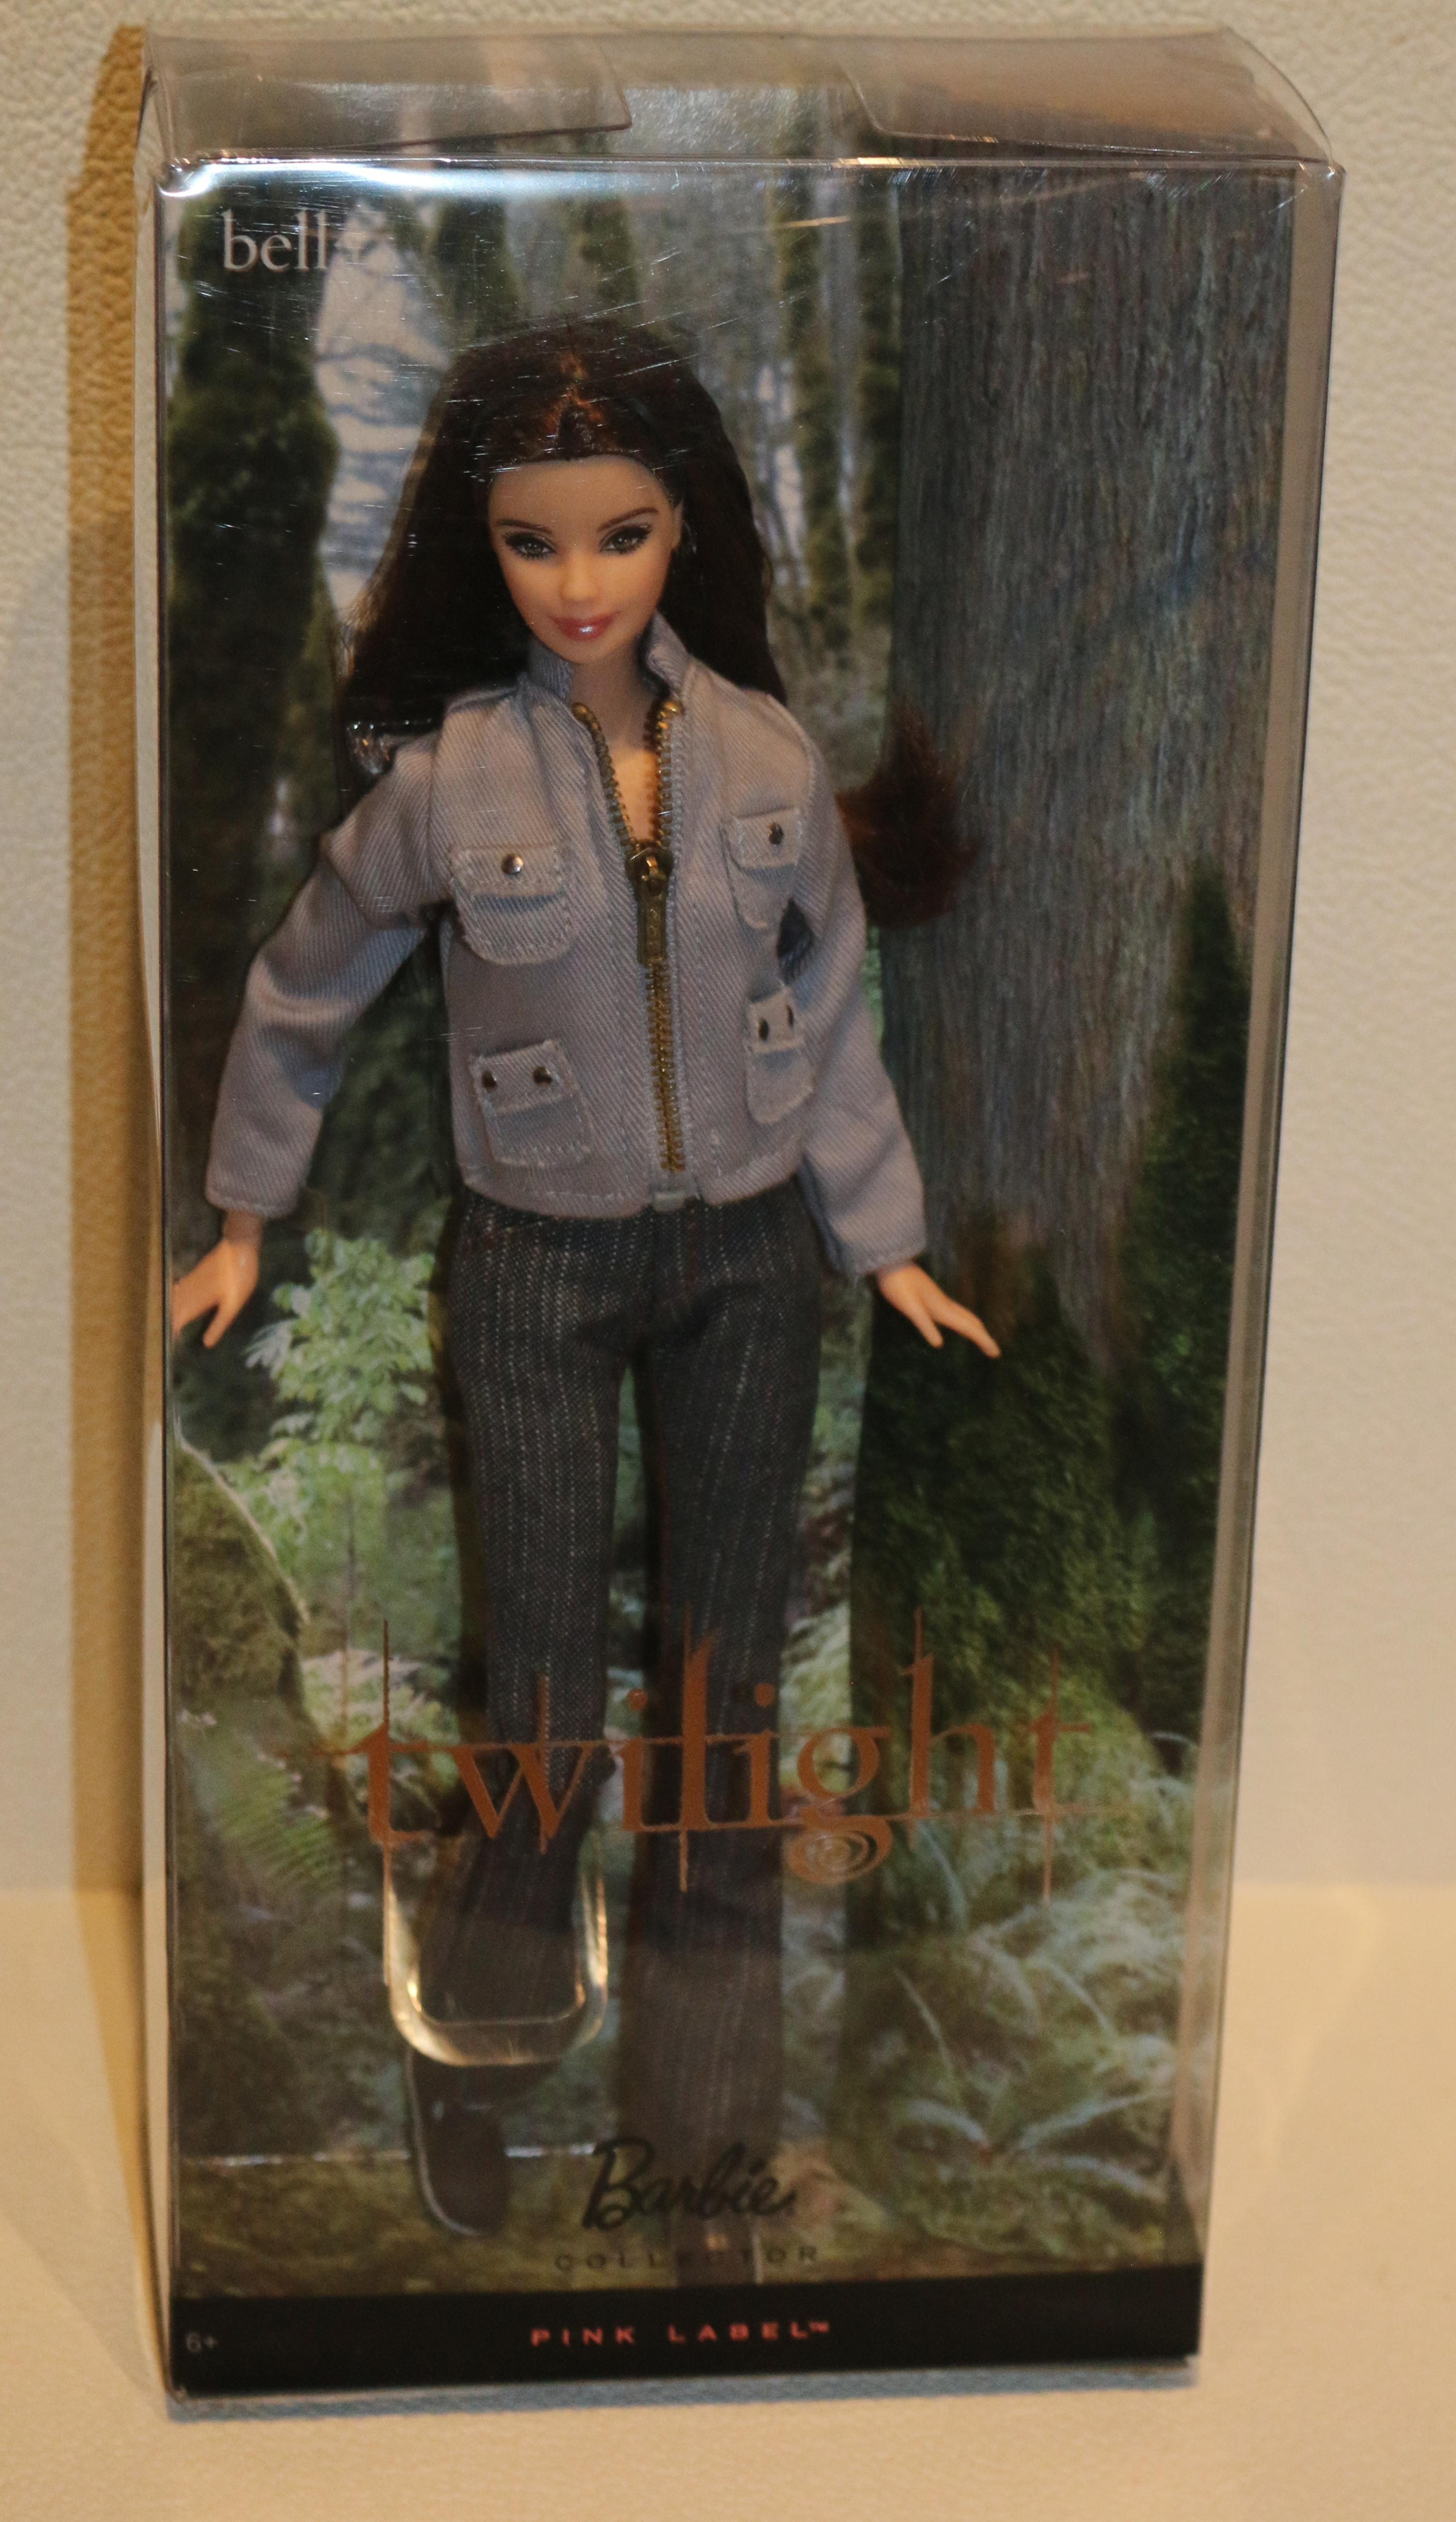 Twilight saga Barbie collection Bella doll pink label new in sealed box package. New: A brand-new, unused, unopened, undamaged item.